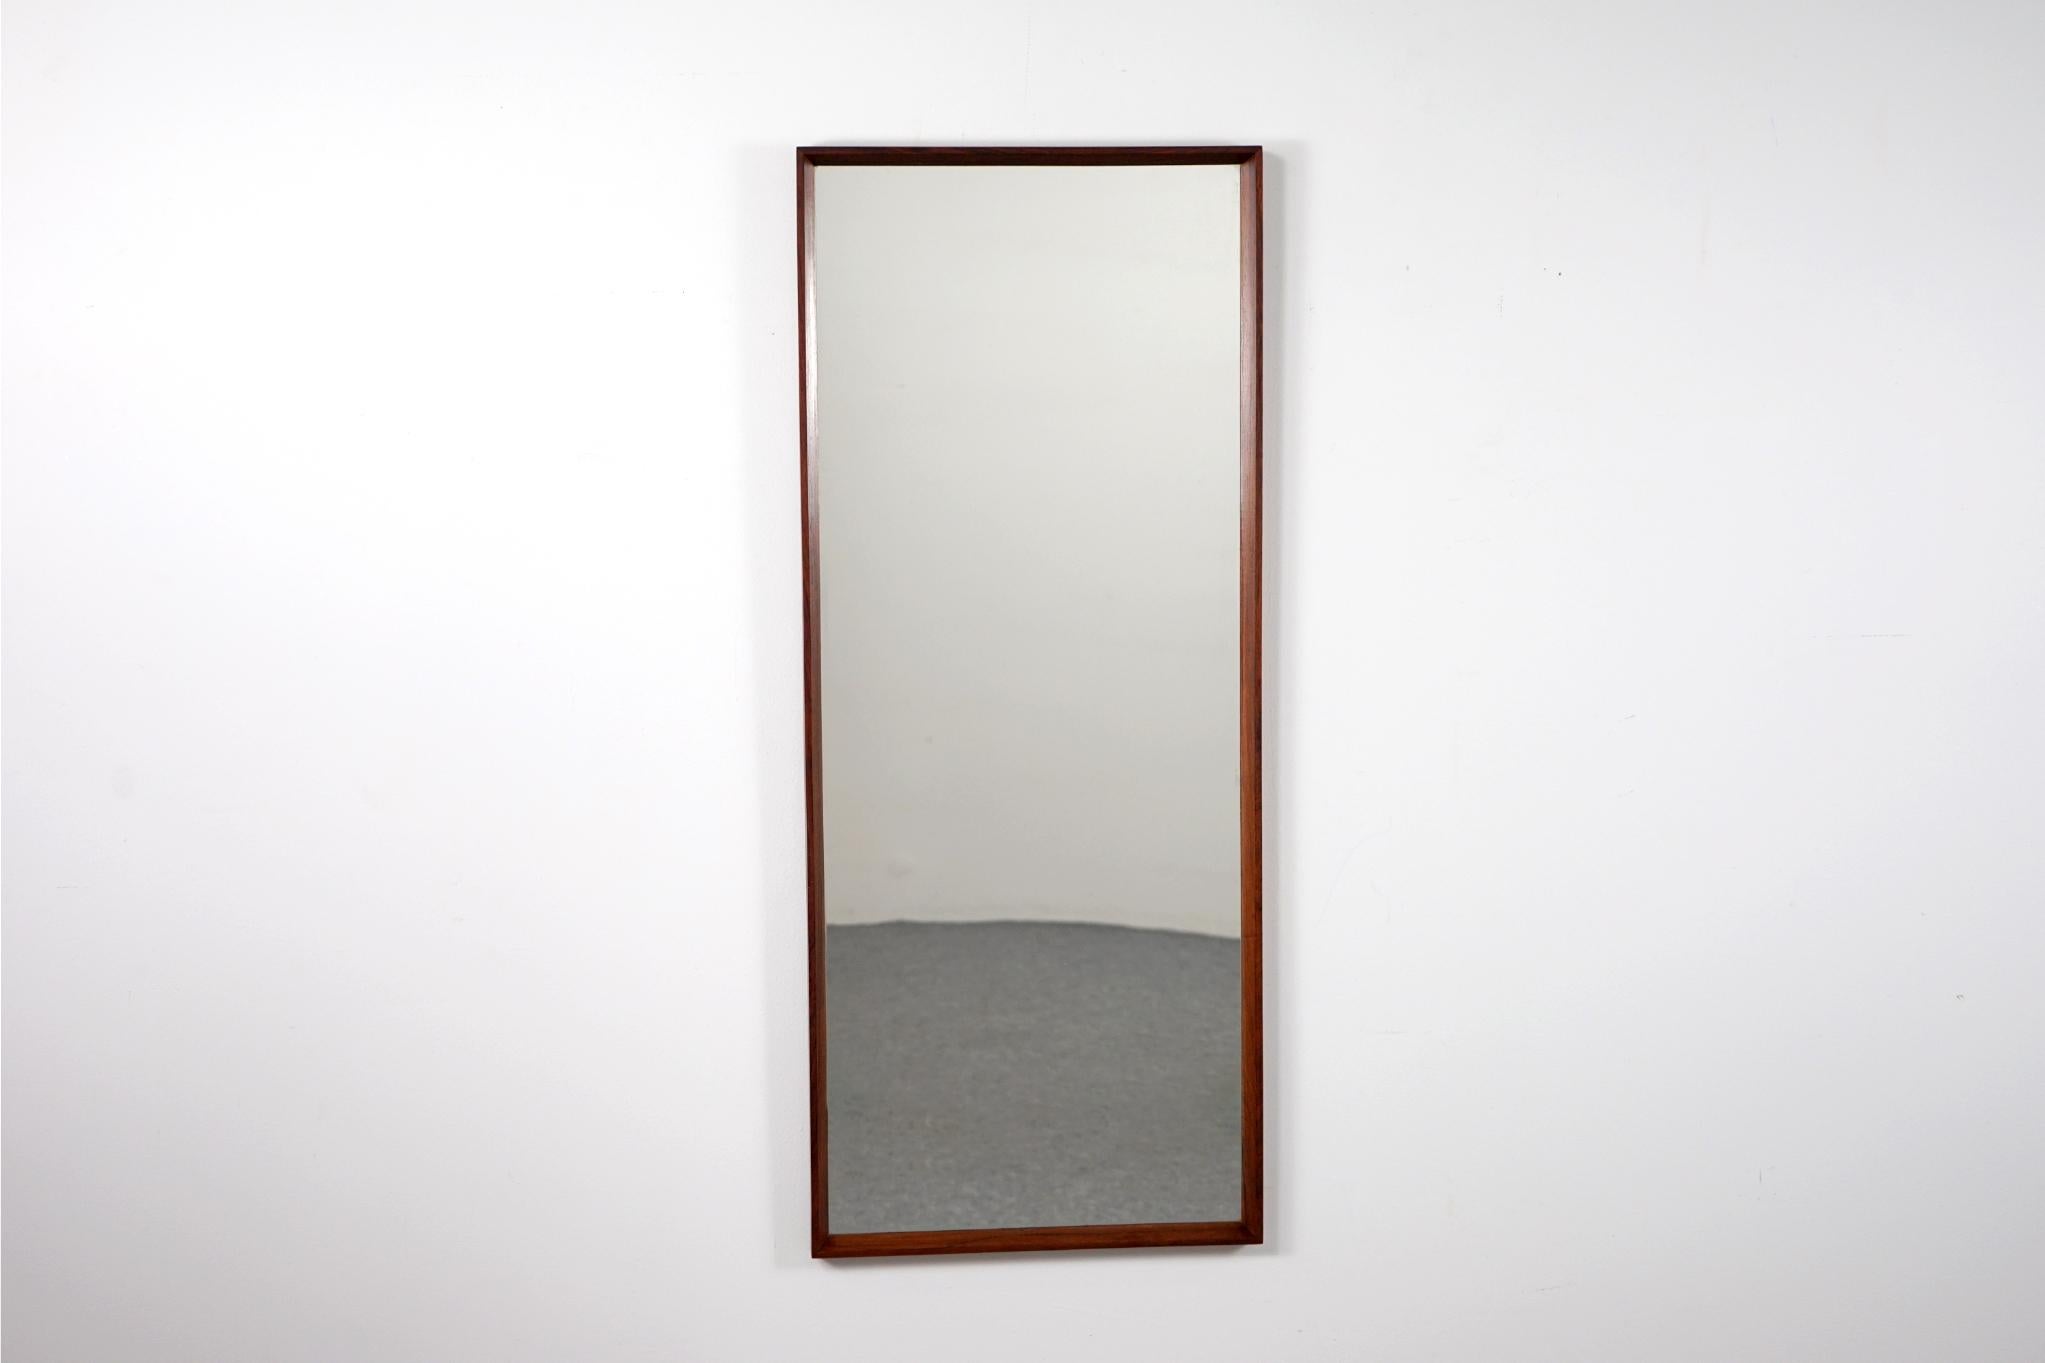 Rosewood mirror, circa 1960's. Solid wood frame shows stunning grain and mirror features its’ original glass. The perfect compliment to any interior especially in small apartments, condos and lofts where space can be tight. Check your look!

Please